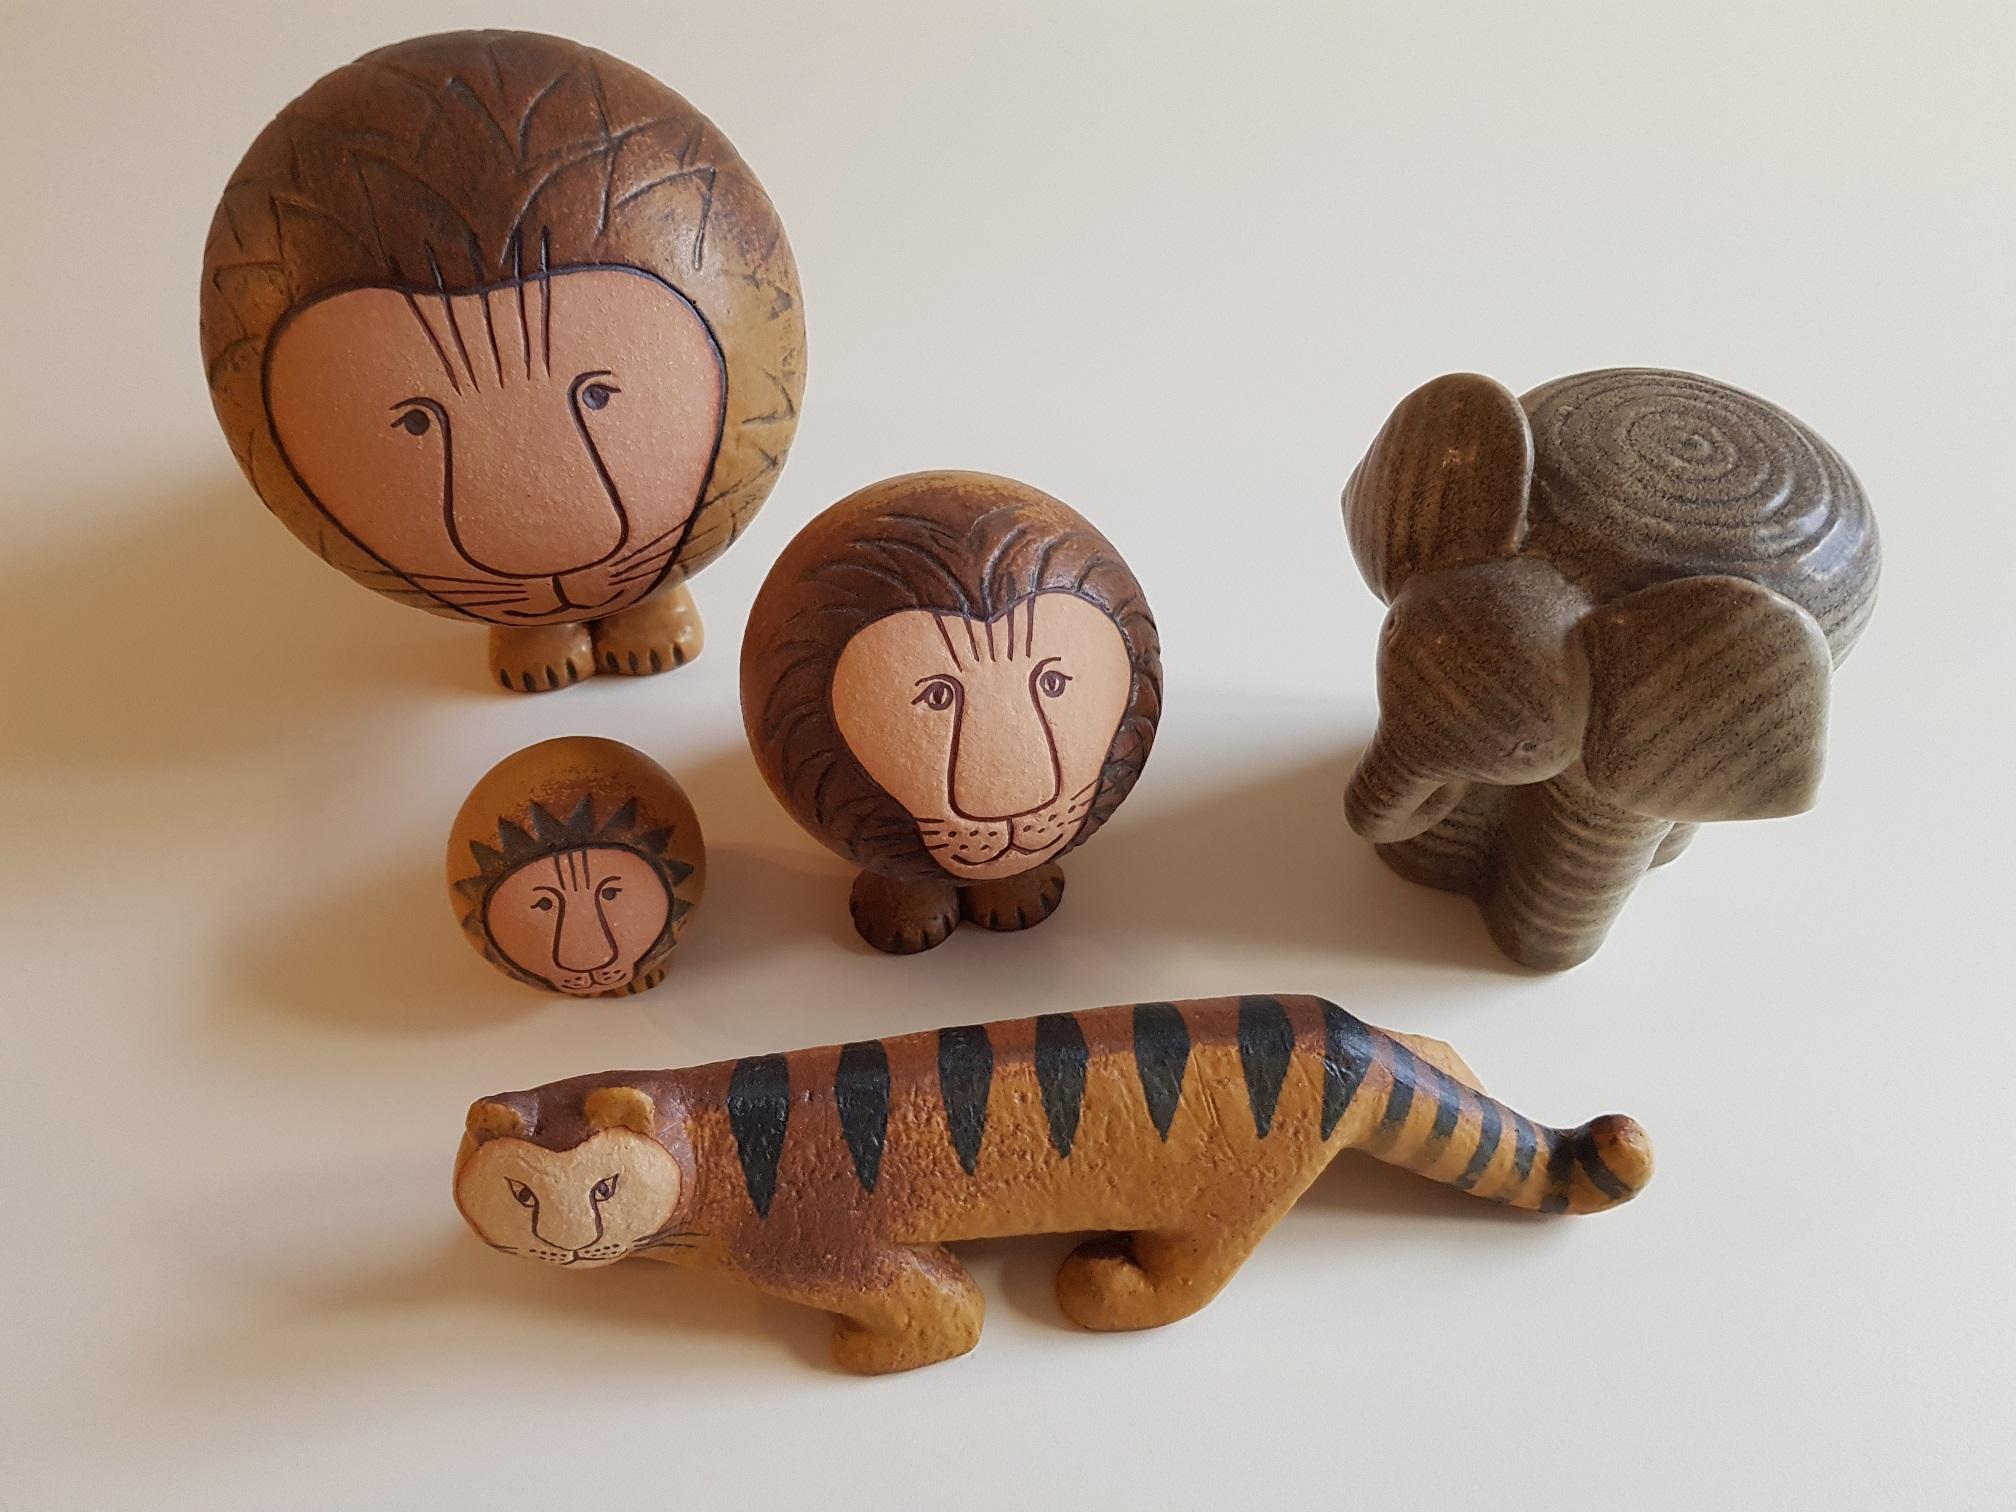 Group of animals. 3 Lions (5,9,14 cm tall), 1 tiger (20 cm long), 1 elephant (12 cm tall). Newer production from the early 2000nds. From the famous Swedish manufacturer Gustavsberg and designed by Lisa Larson who is famous for her imaginative and